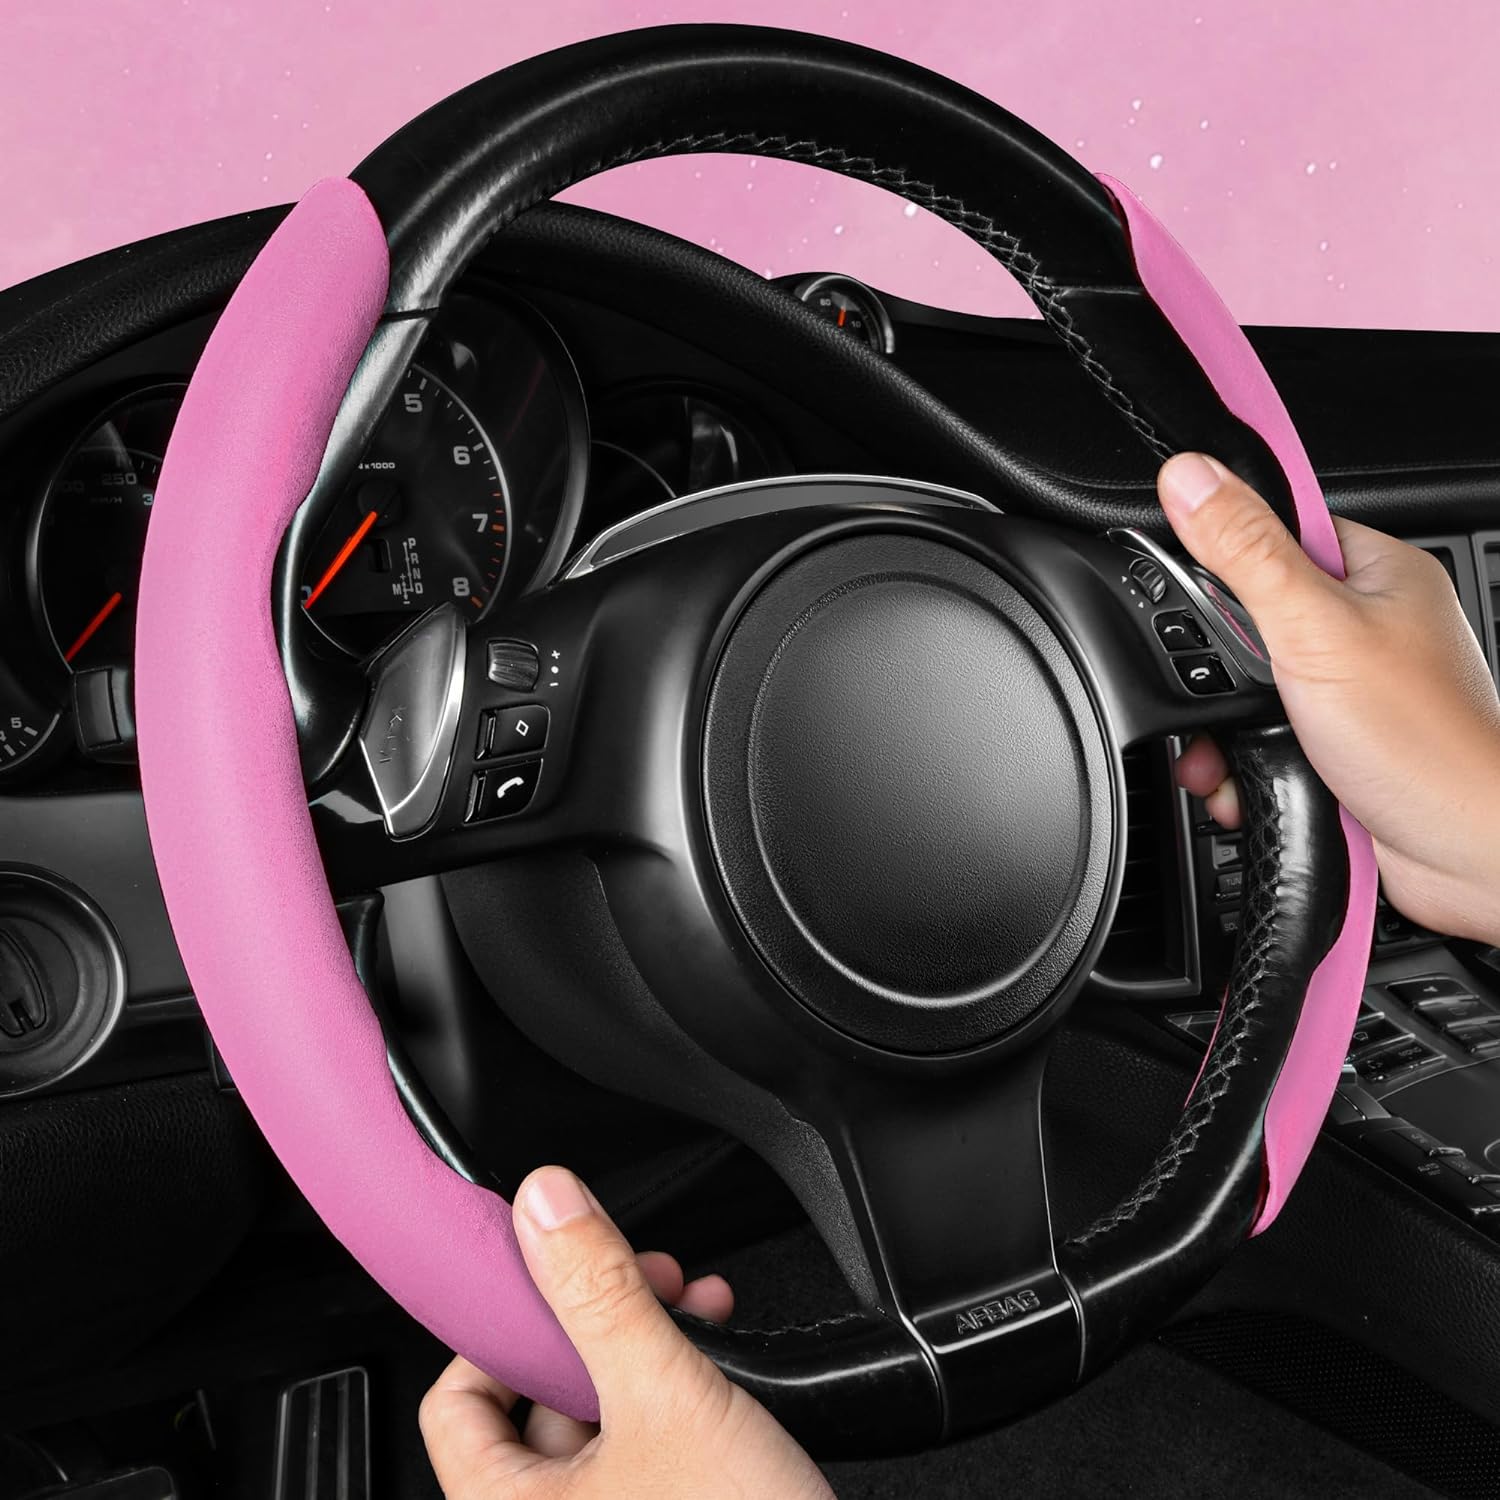 CAR PASS Carbon Fiber Steering Wheel Cover, Segmented Wheel Protector Non-Slip Sporty Car Accessories, Universal Fit for D-Shape O-Shape 14.5